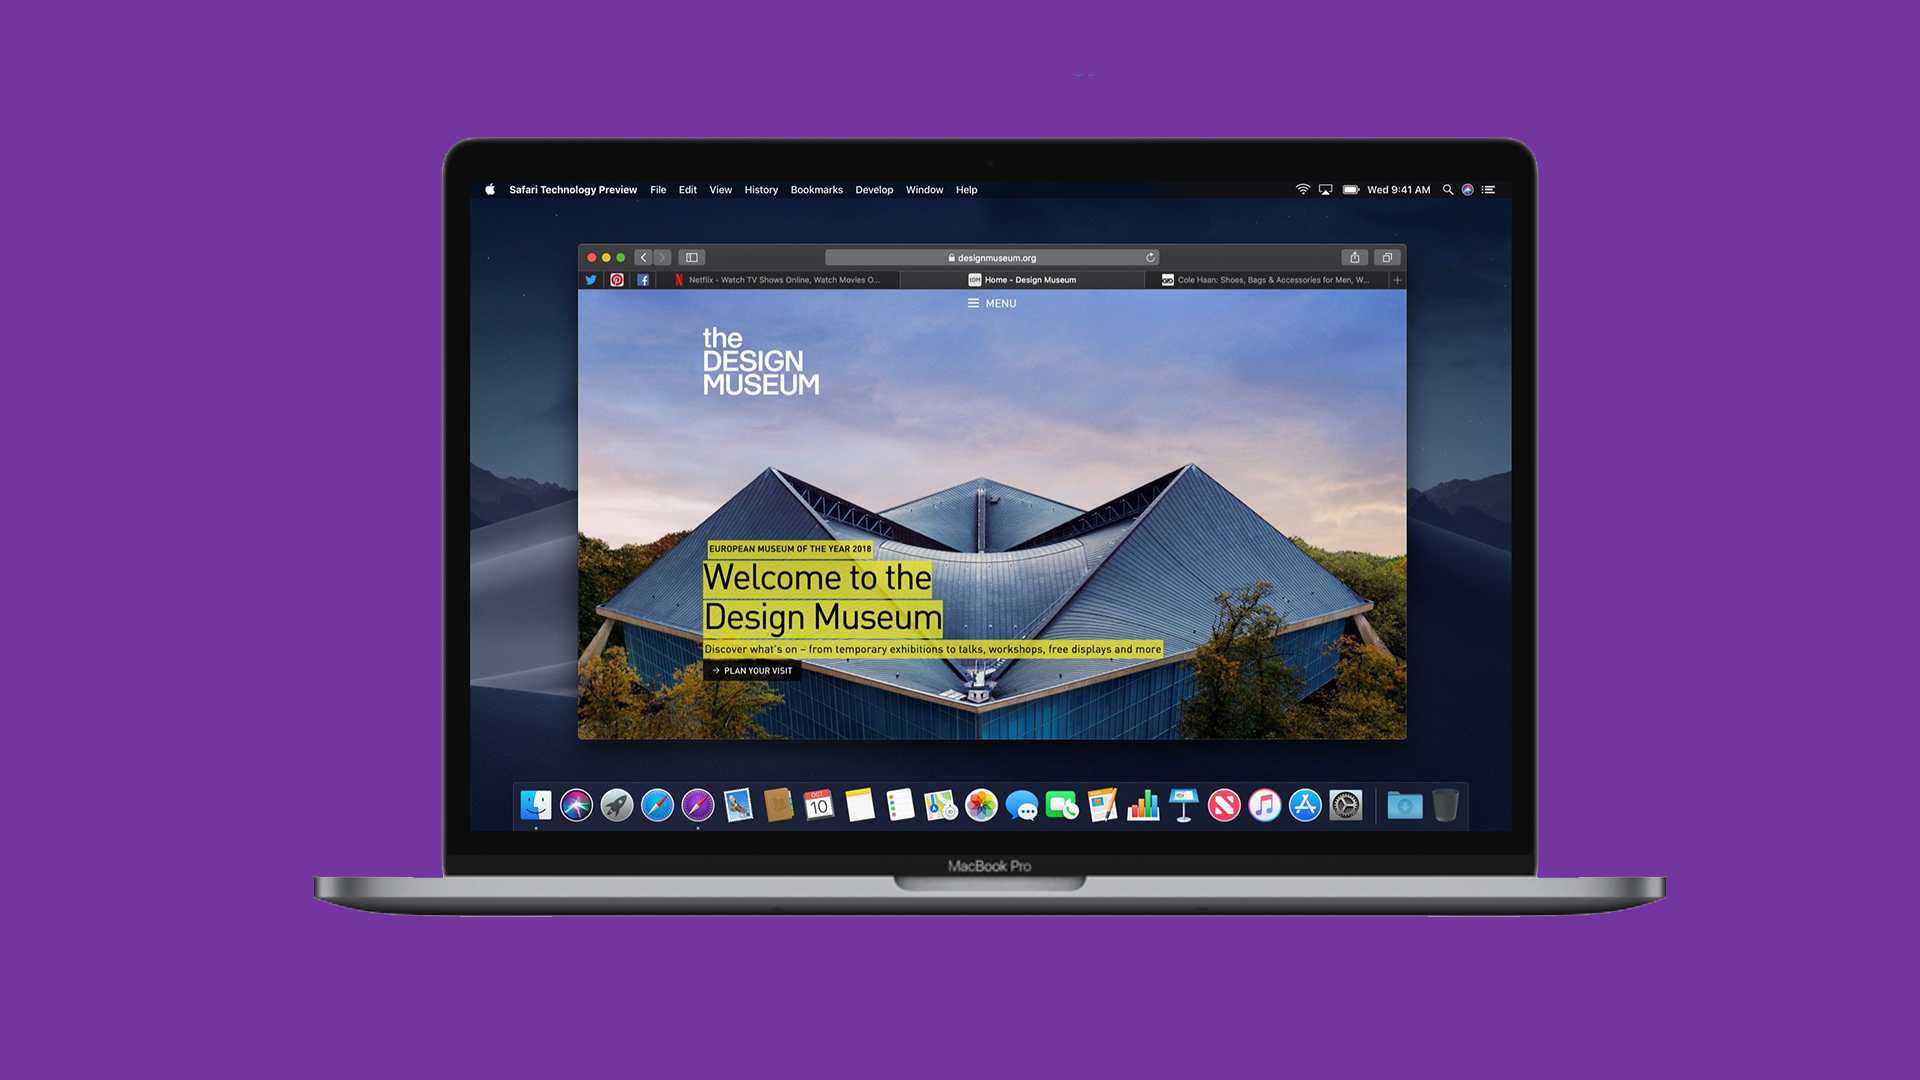 Apple releases Safari Technology Preview 129 - 9to5Mac